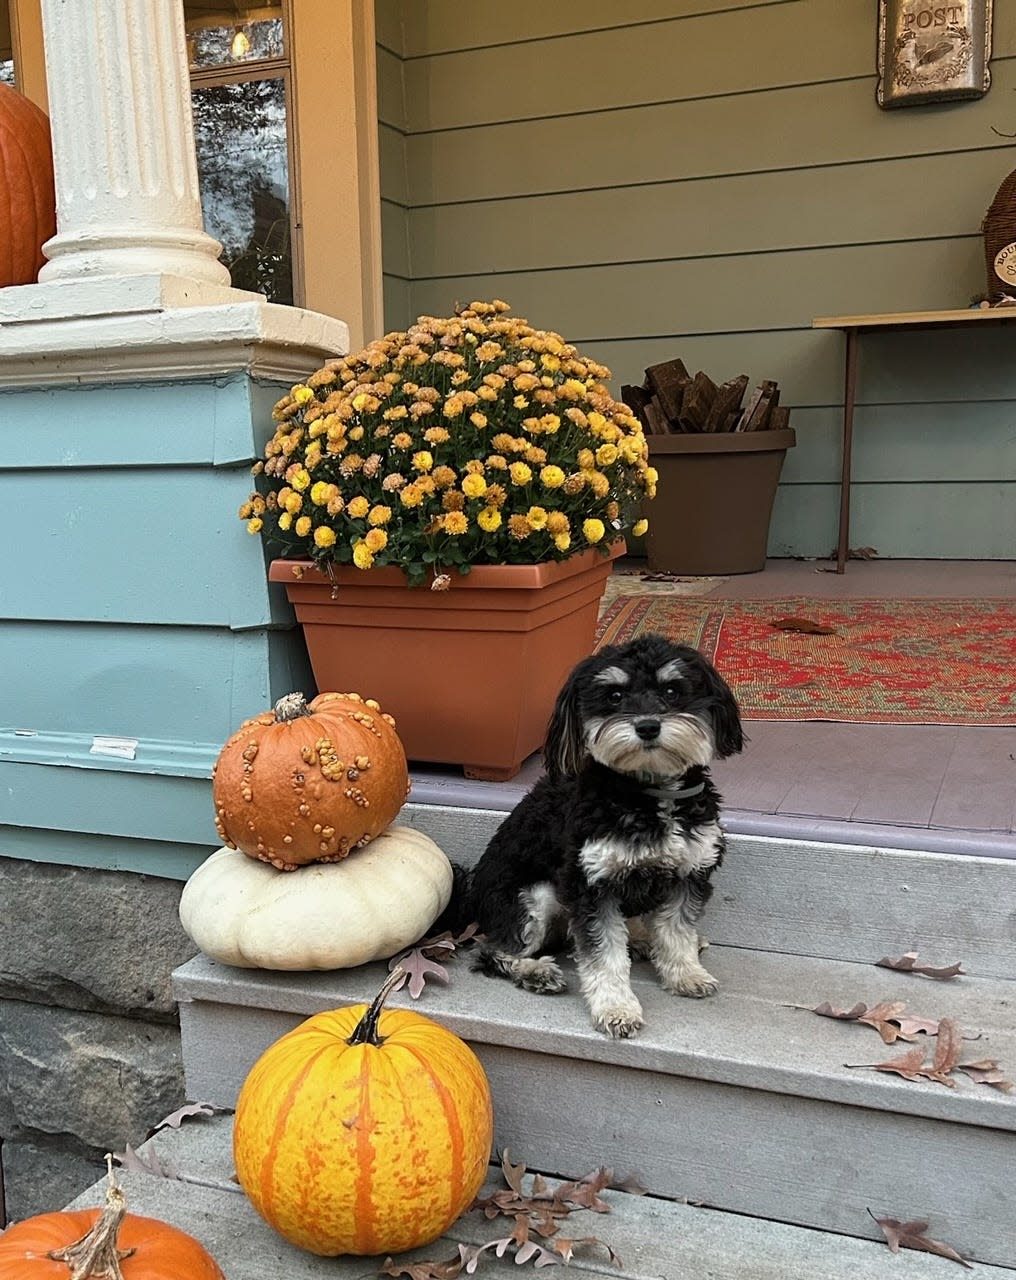 Henry rules Holly Christensen's house. Doesn't he look regal sitting among the mums and gourds on her front porch?